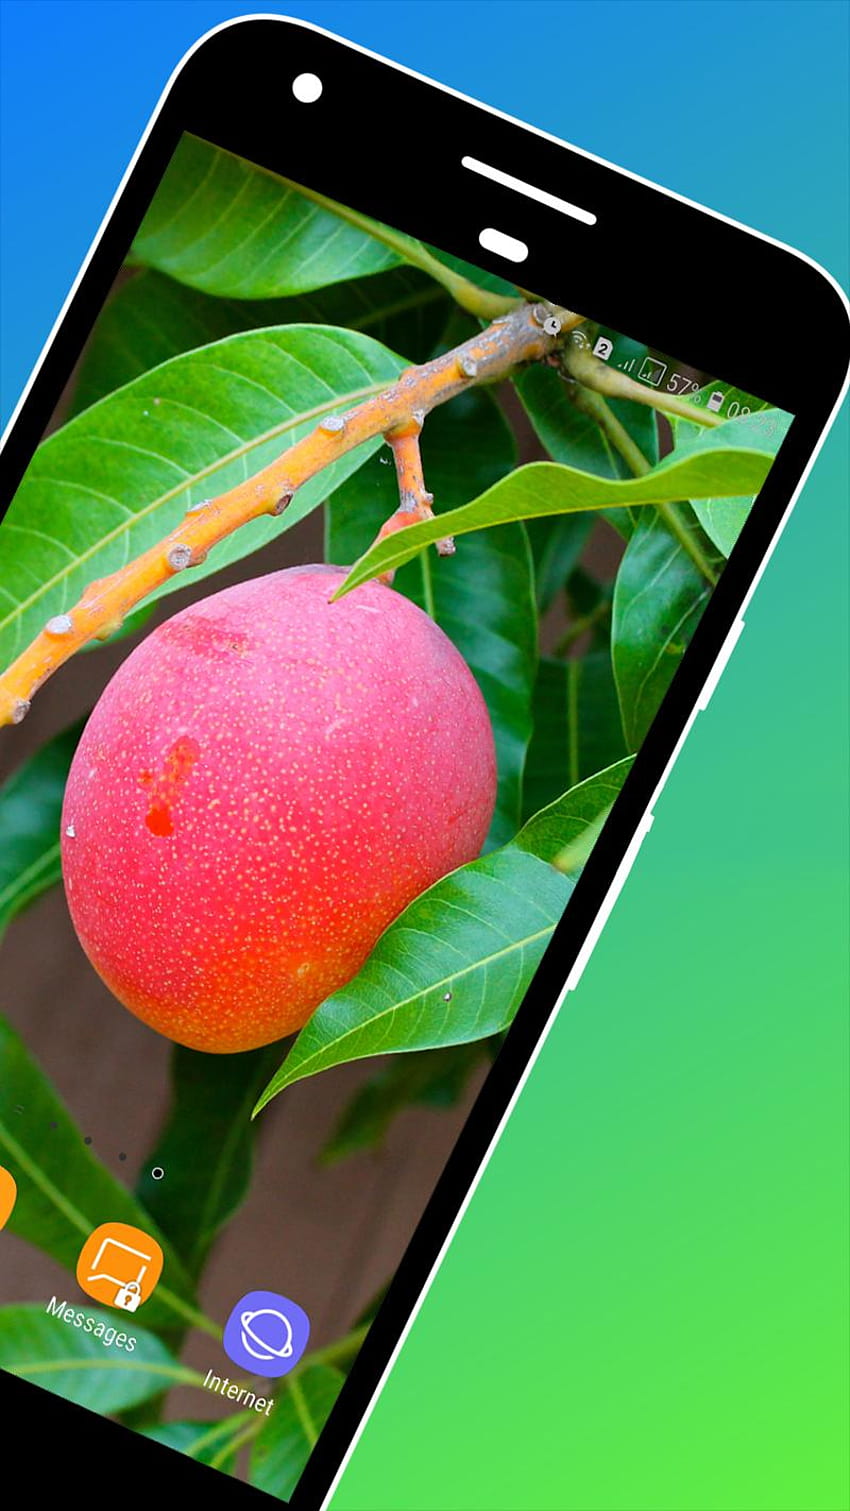 Mango for Android, mango tree android HD phone wallpaper